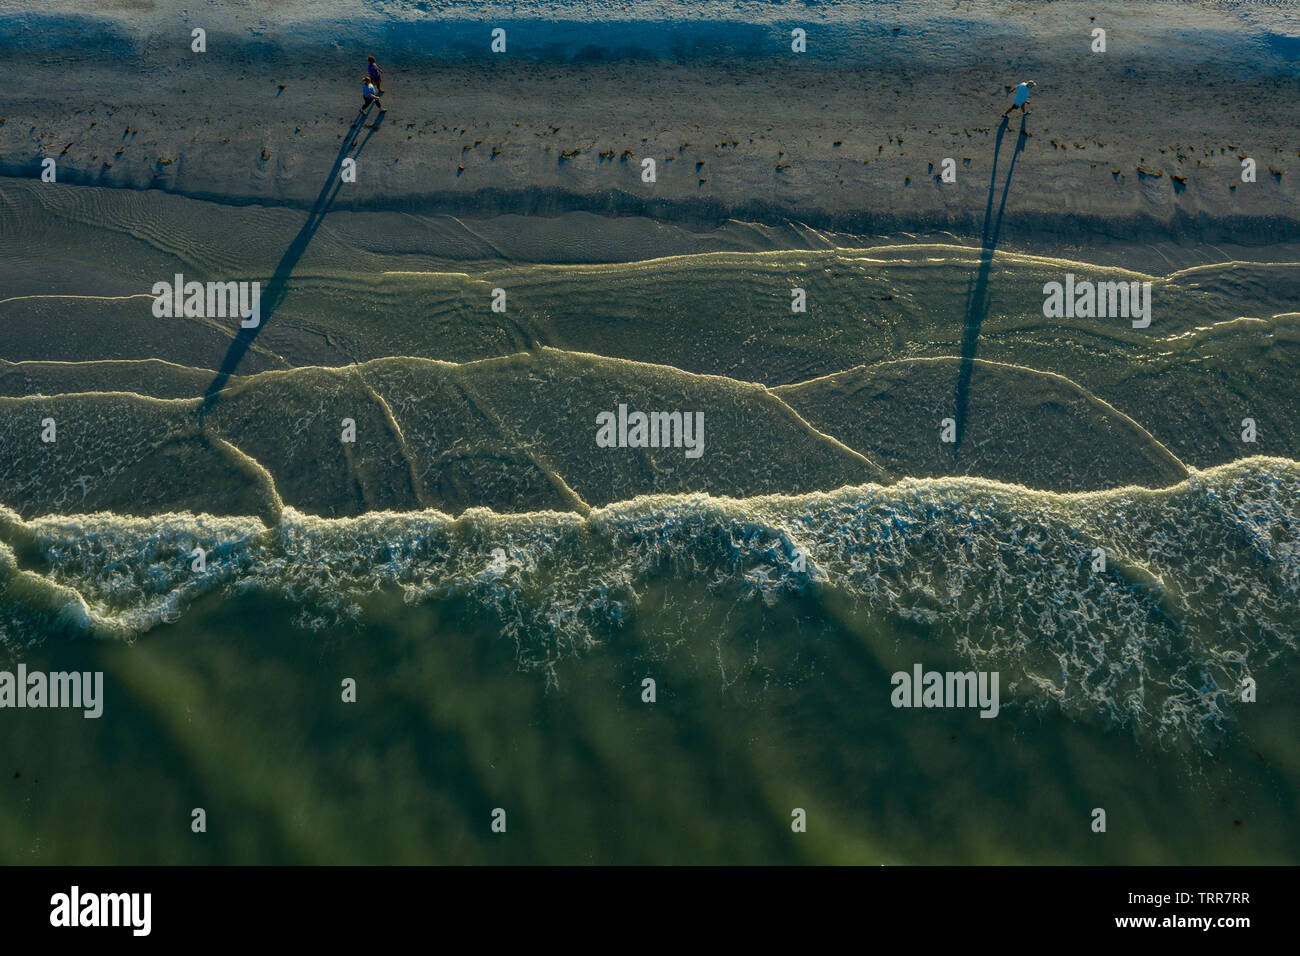 Ariel view of woman running along beach as waves roll in St. Pete Beach Florida. Stock Photo